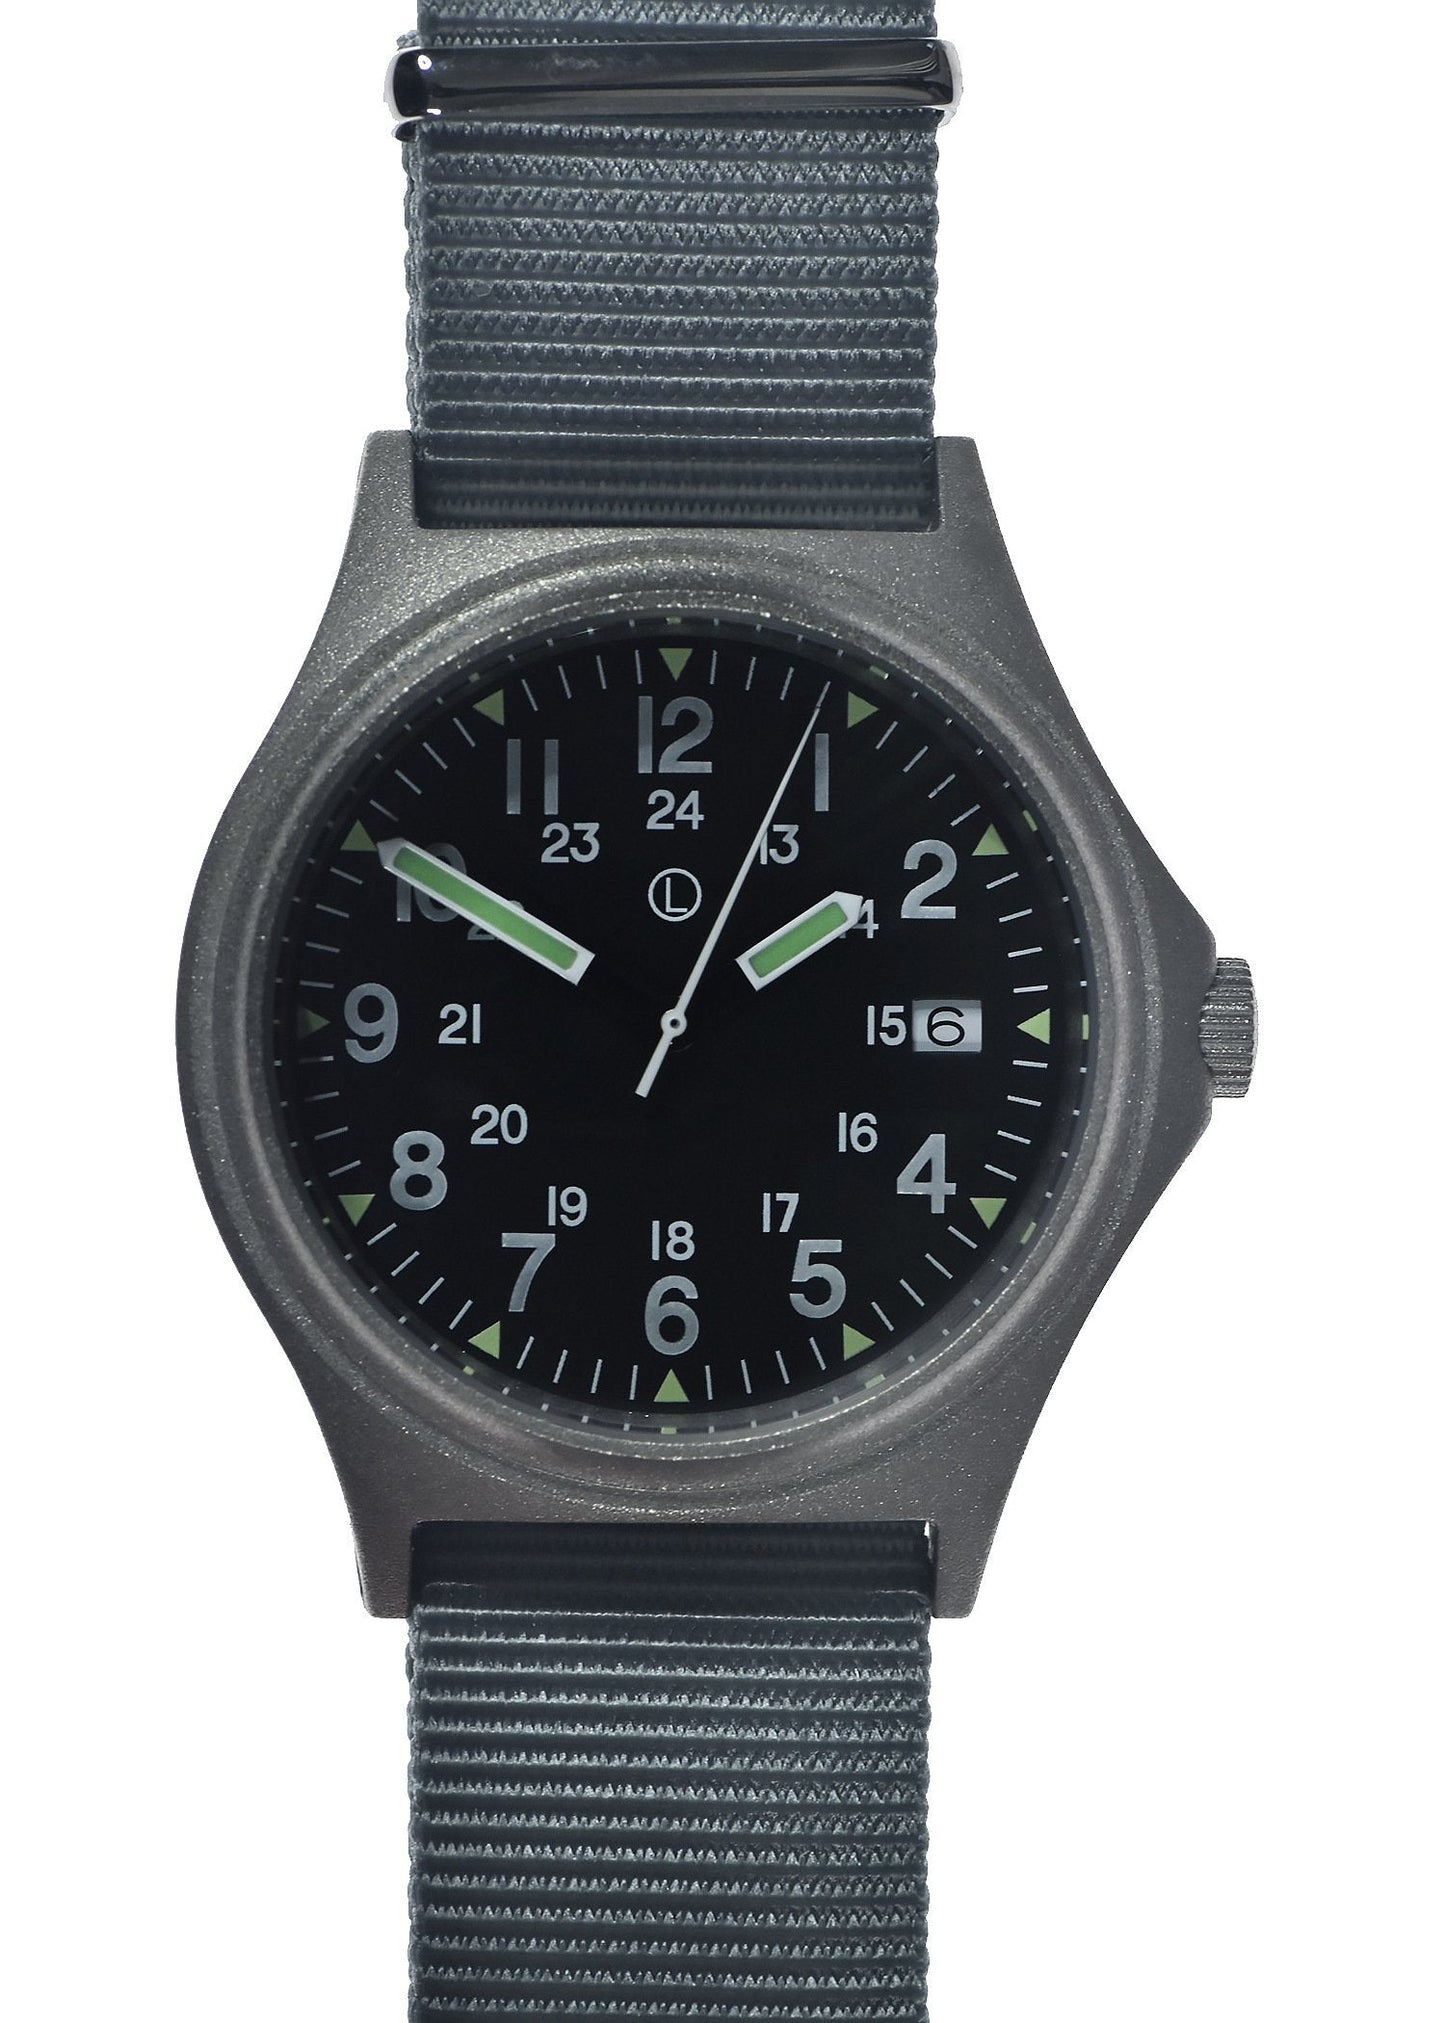 MWC G10 100m Water resistant Military Watch in Stainless Steel Case with Screw Crown (Sterile Dial)